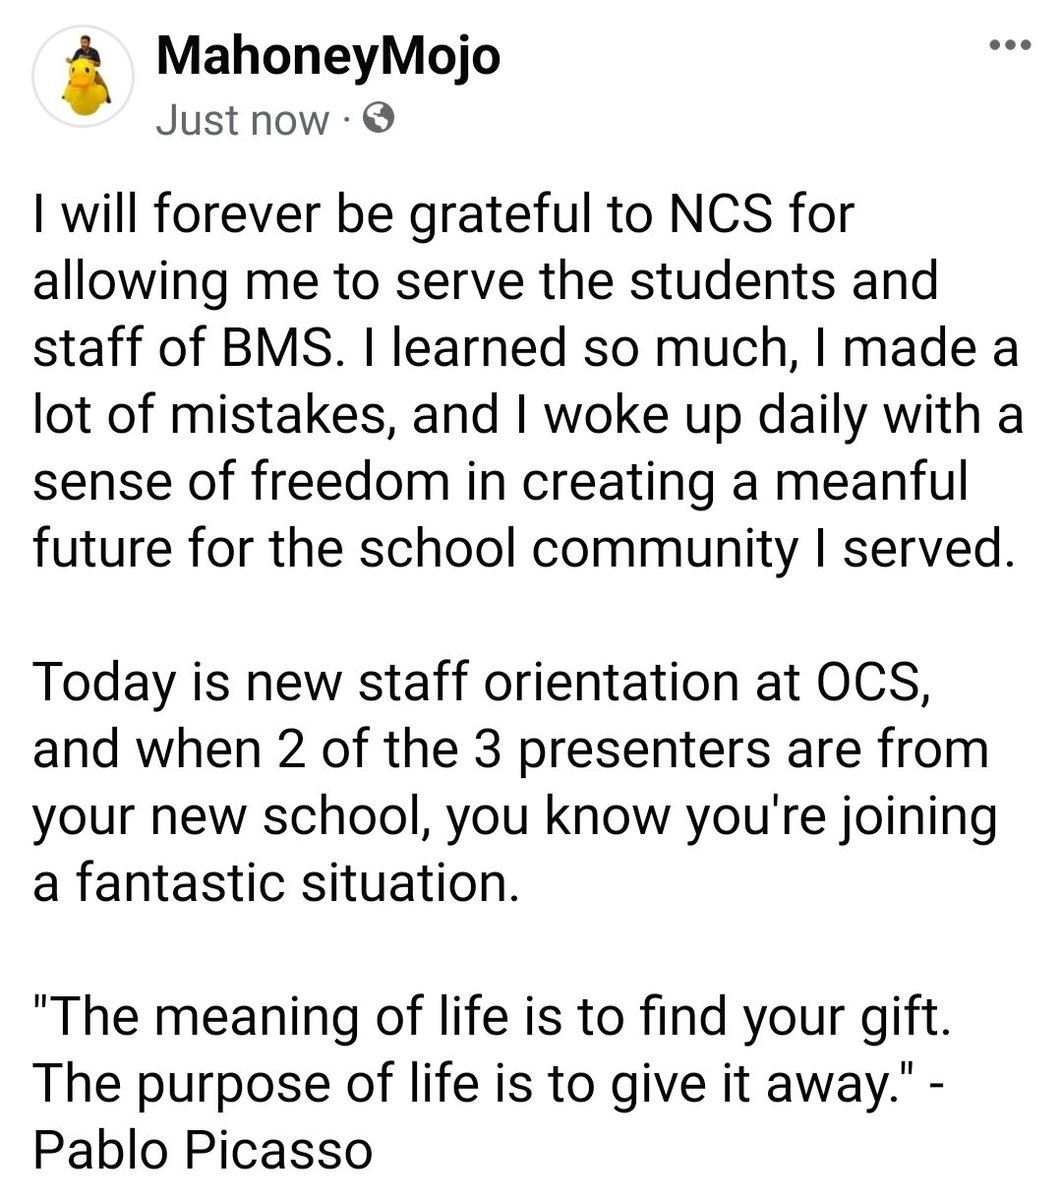 I will forever be grateful to NCS for allowing me to serve the students and staff of BMS. I learned so much, I made a lot of mistakes, and I woke up daily with a sense of freedom in creating a meanful future for the school community I served. 
(See pic 3)

#TeamOldham